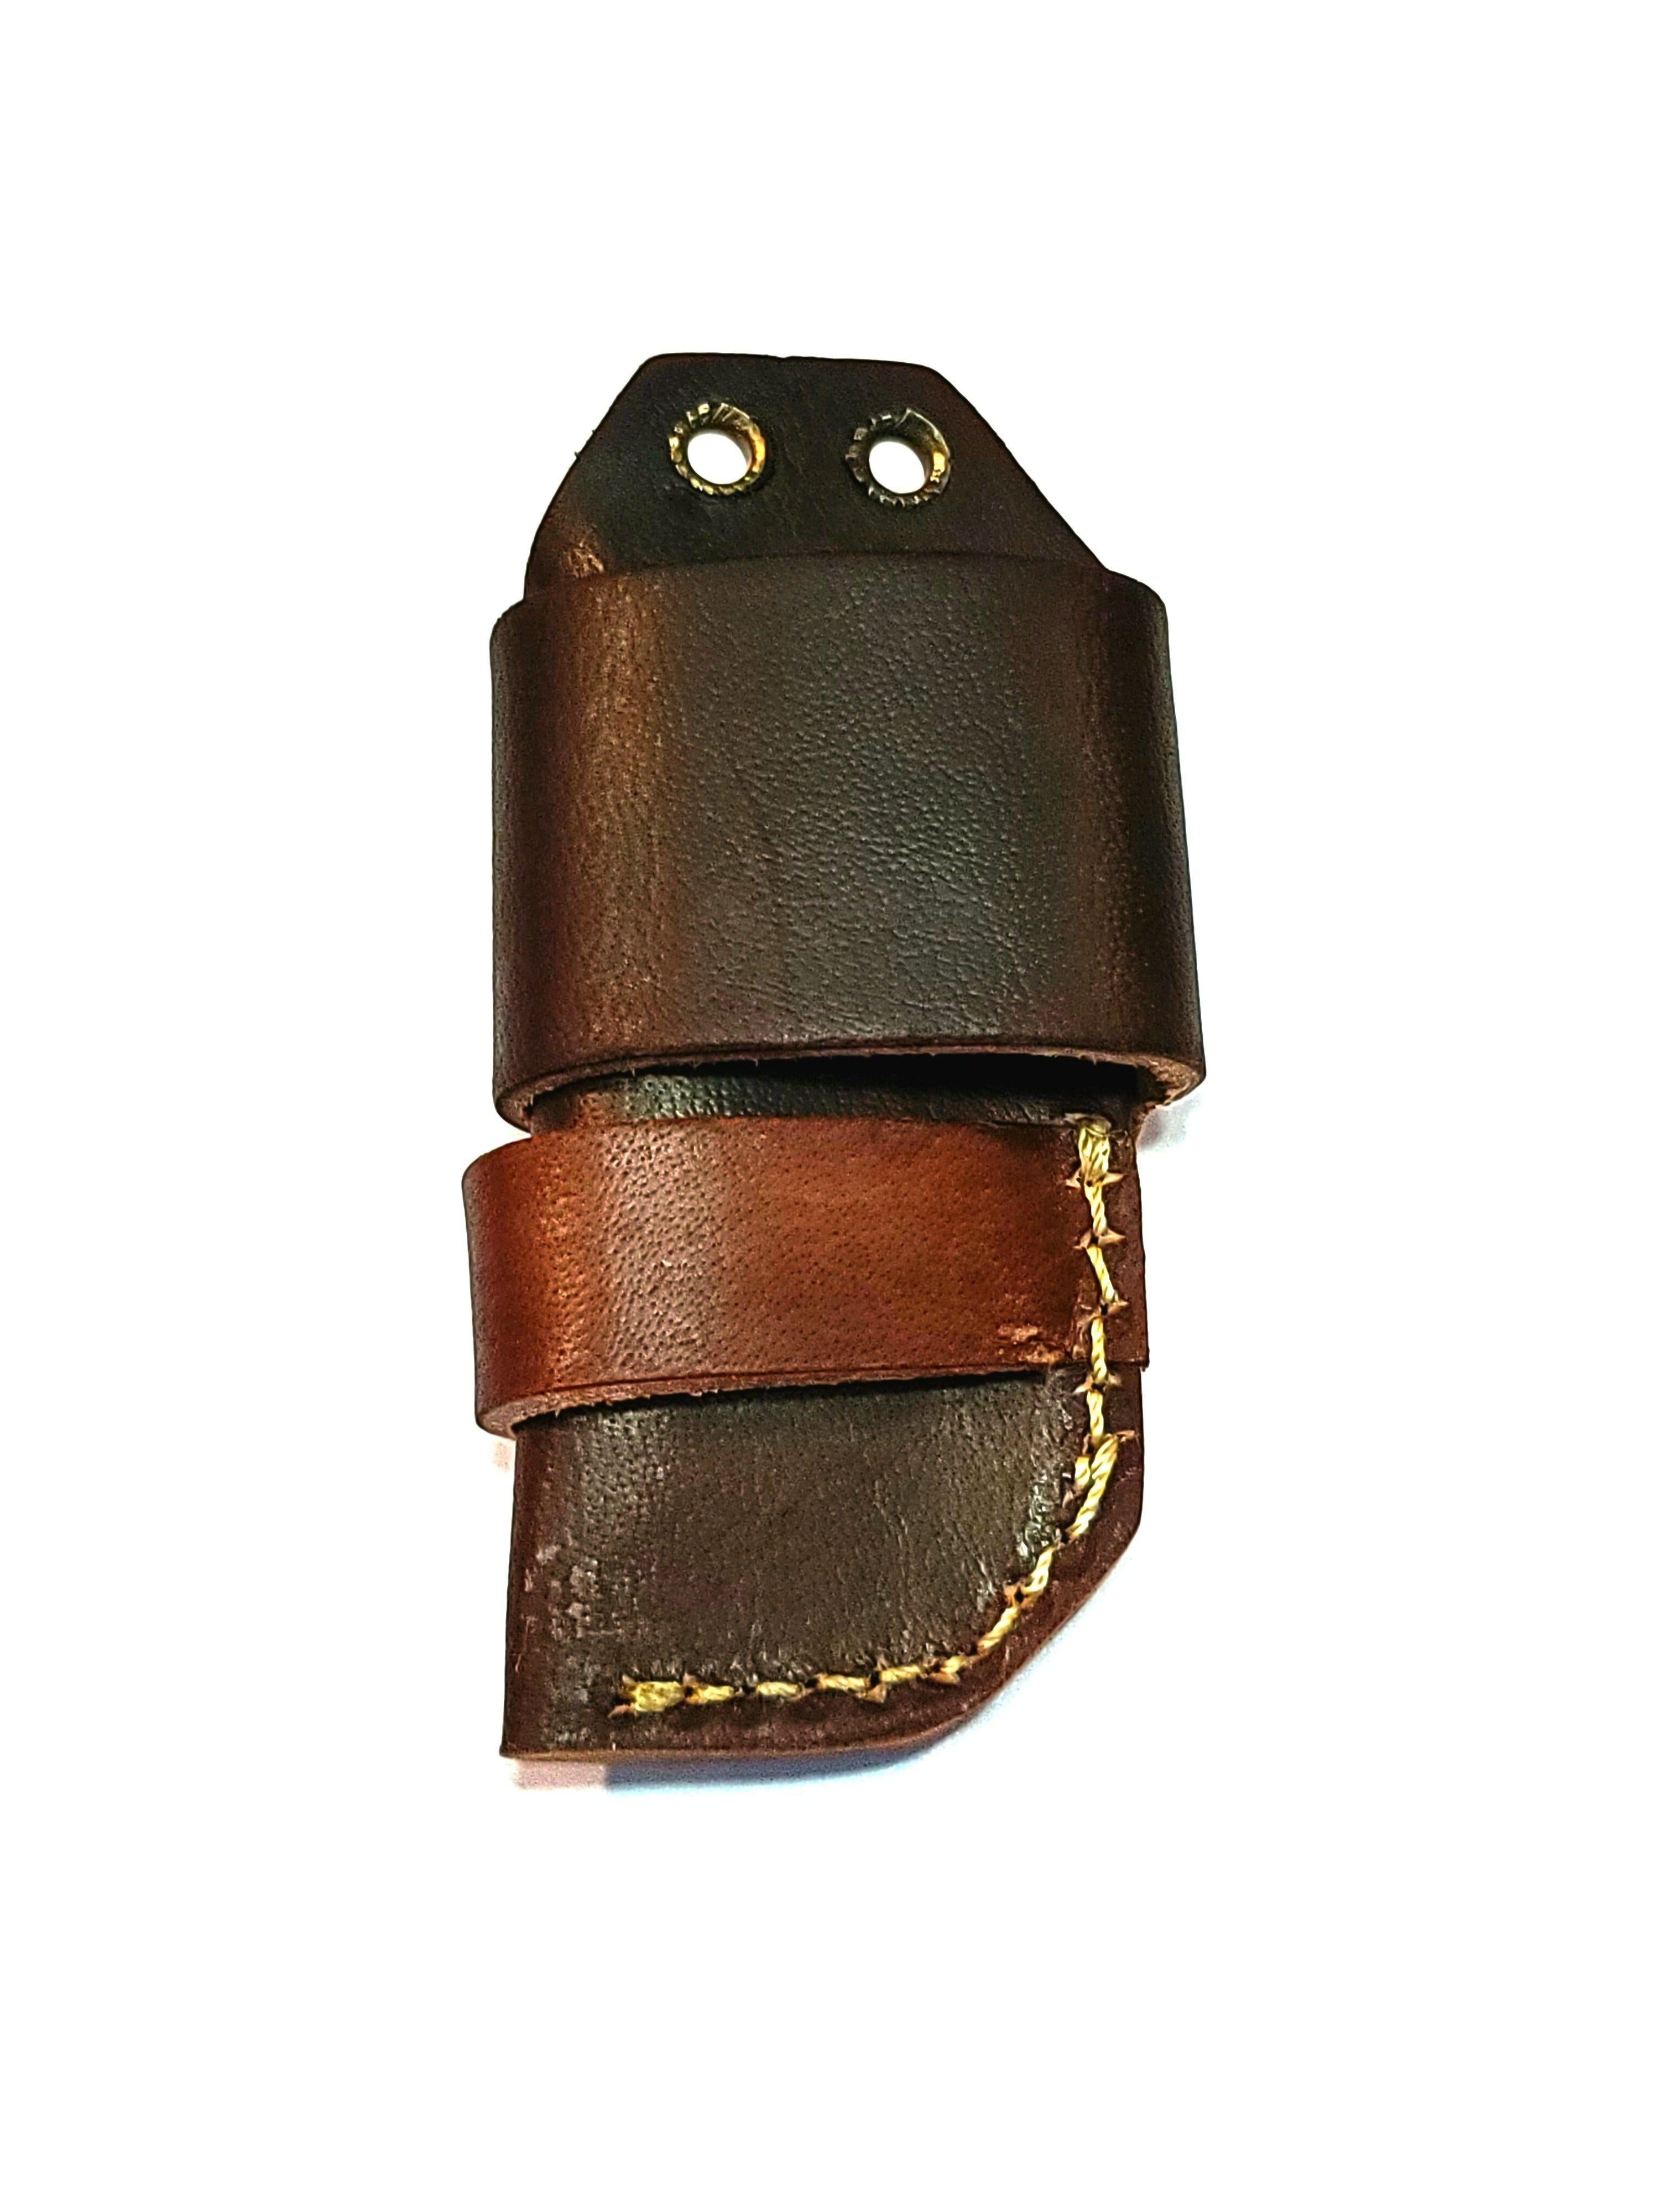 Leather Sheath With Belt Loop for Opinel Folding Knife Pouch 